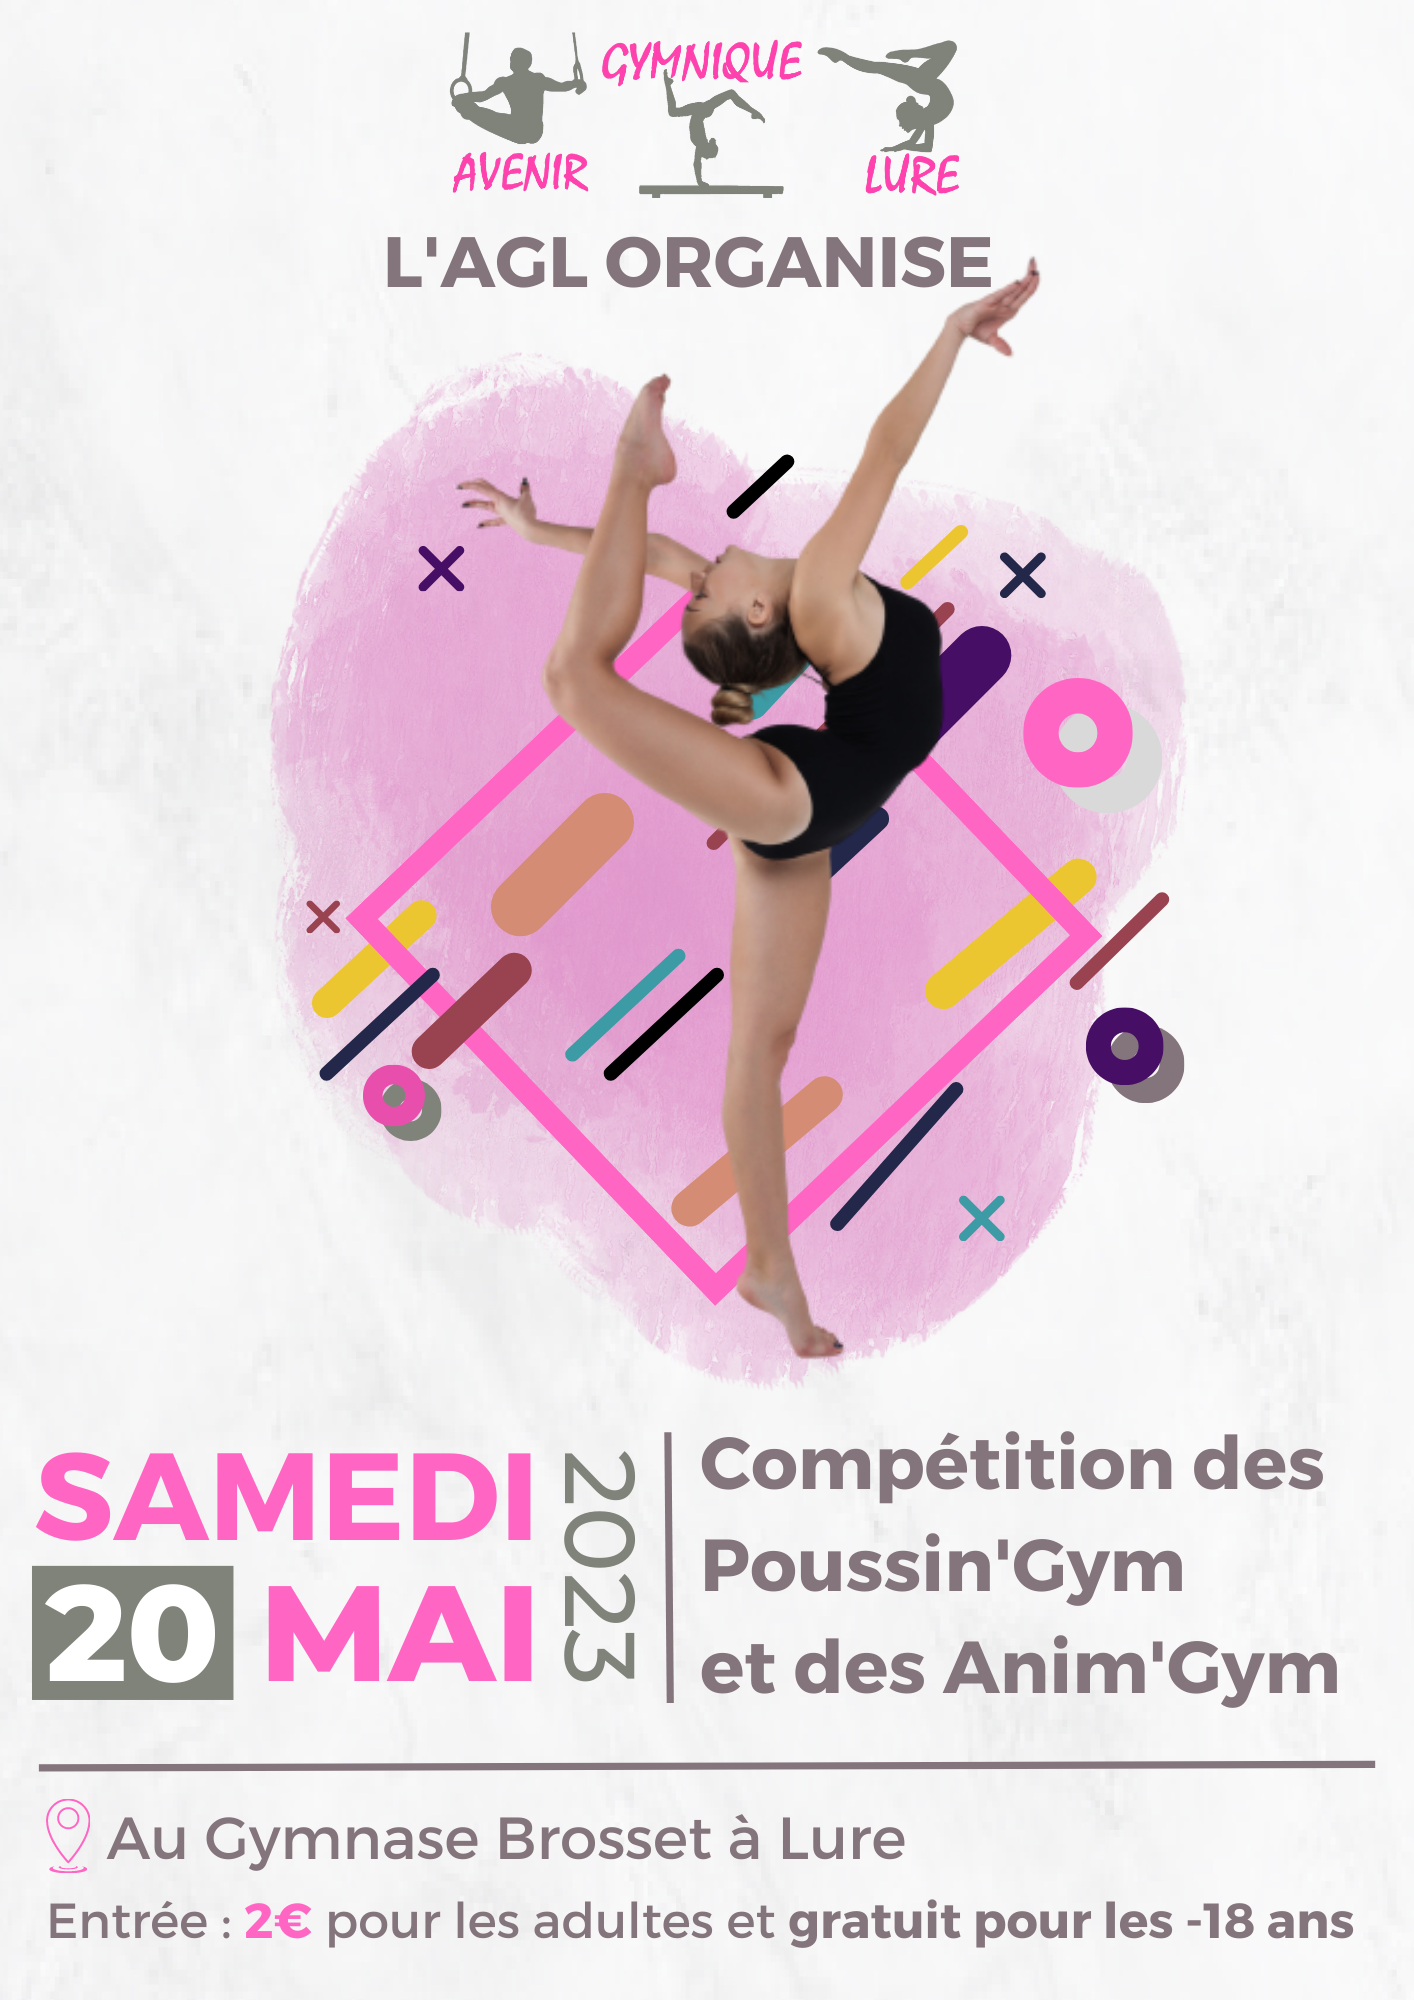 You are currently viewing SAVE THE DATE – Compétition des poussin’gym et des anim’gym